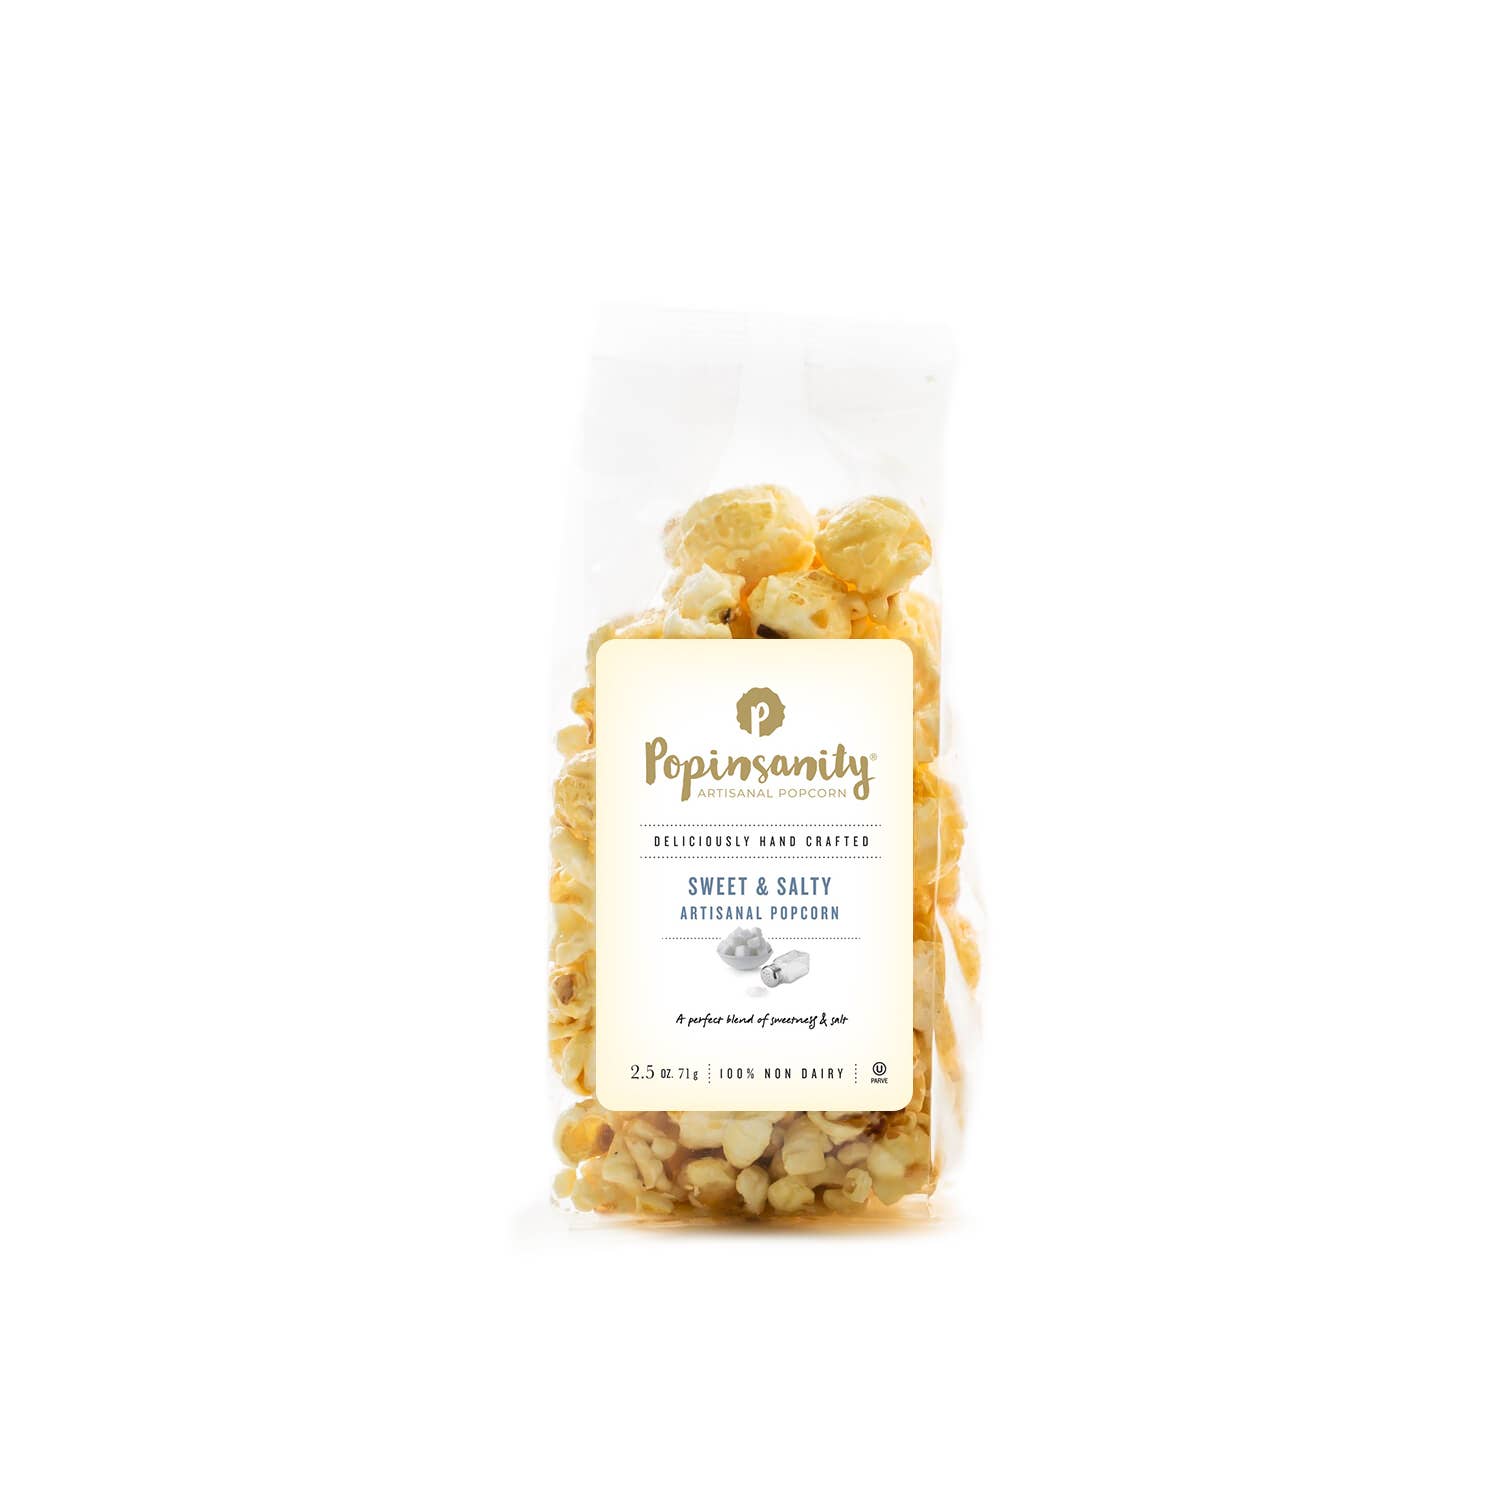 Popinsanity Gourmet Popcorn - Sweet and Salty Gourmet Popcorn Snack or Gift - Small Bag